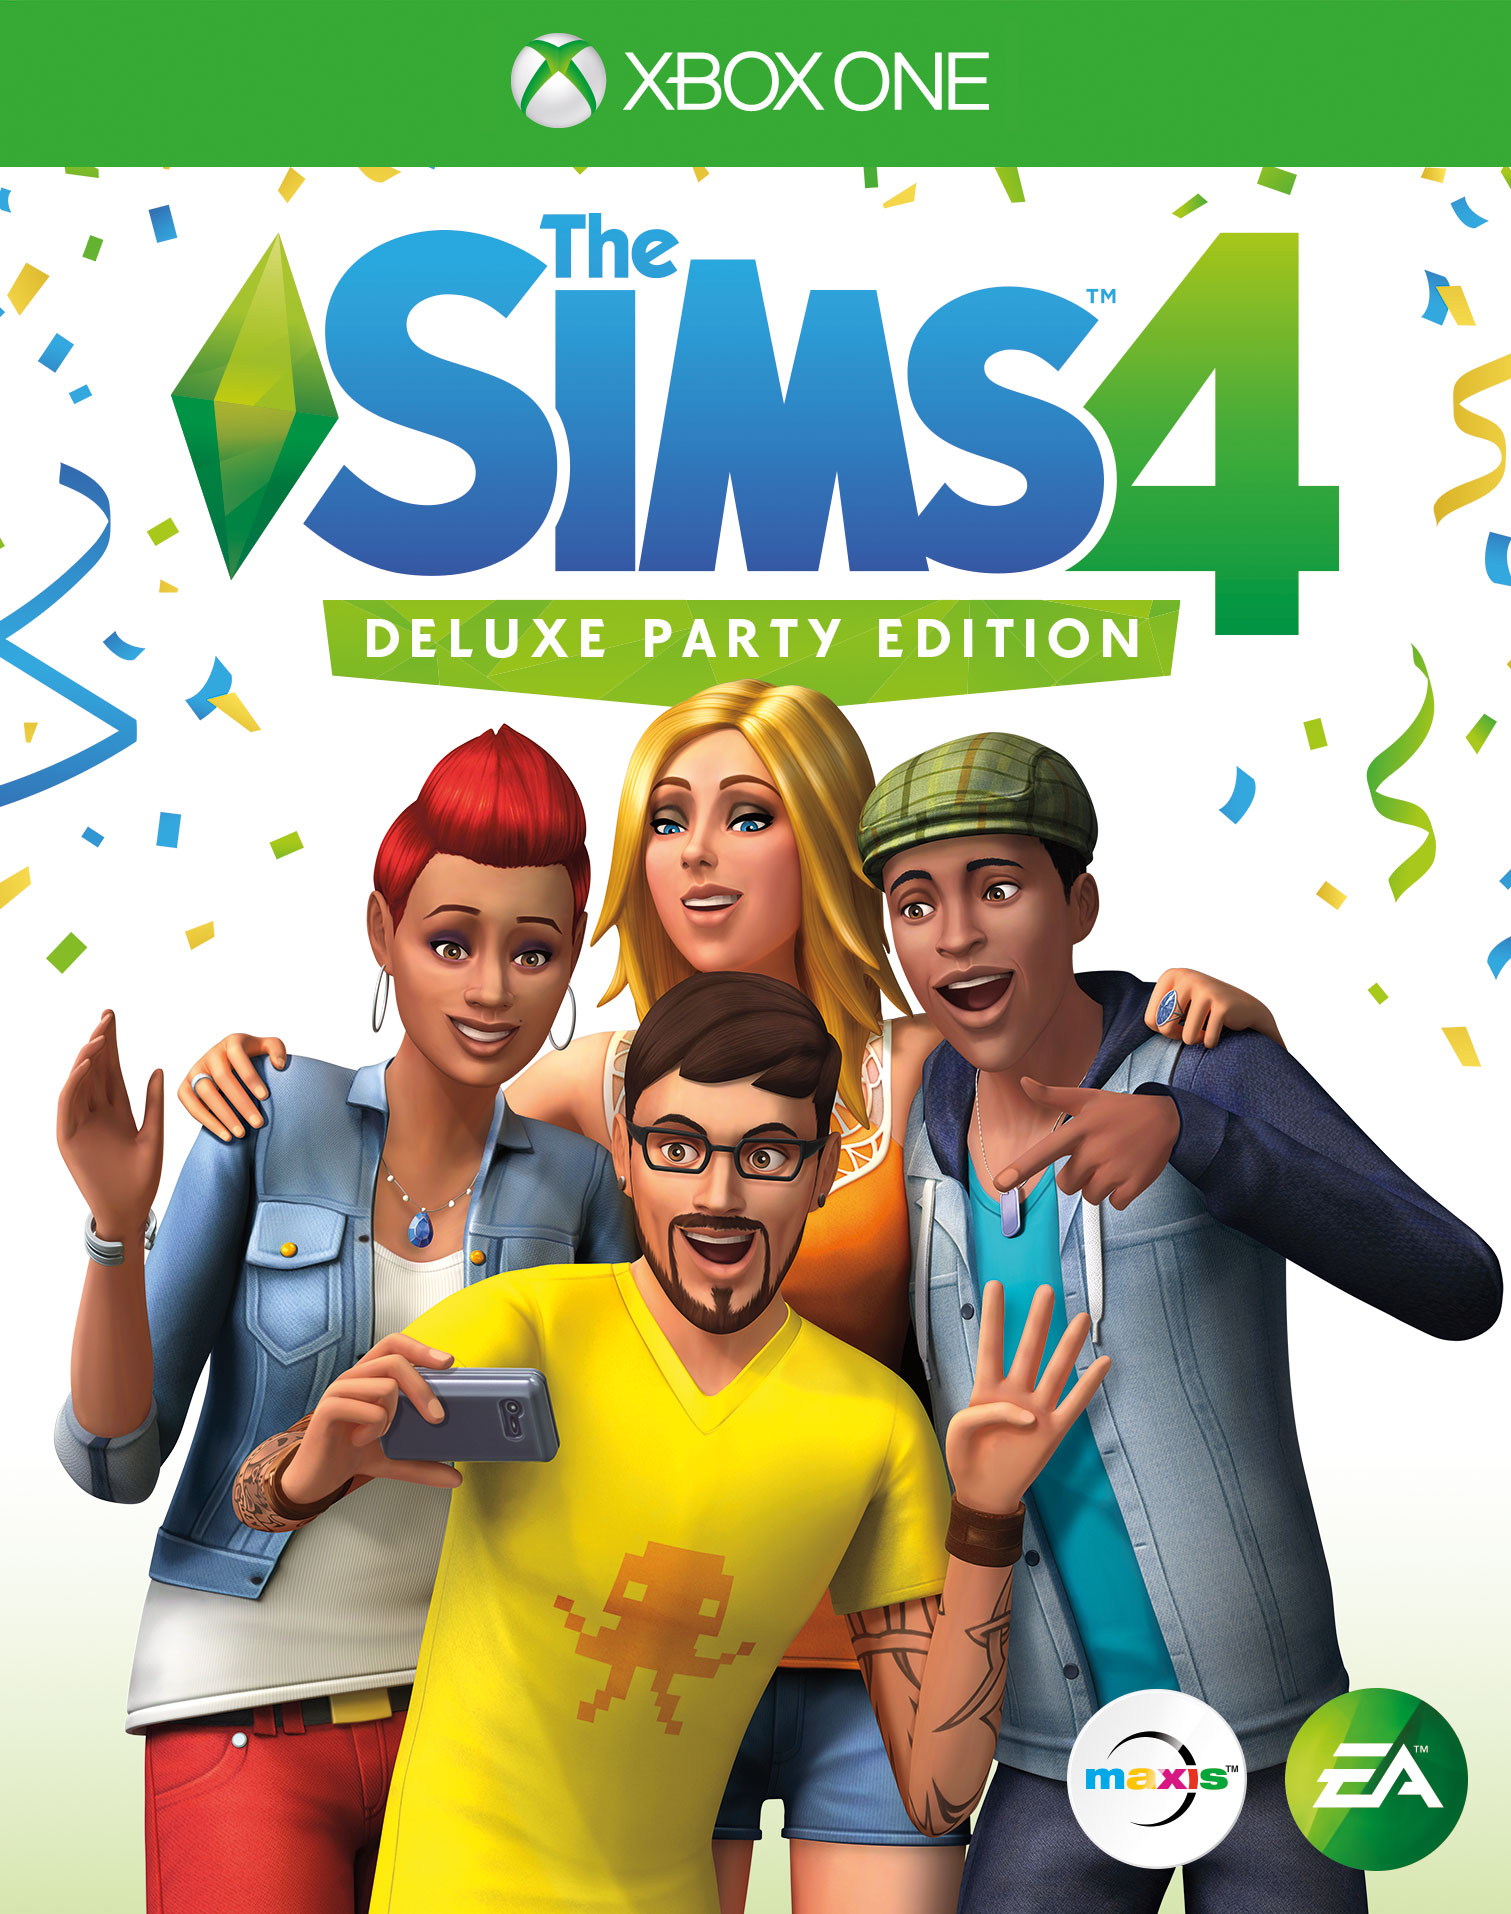 the sims 4 free download pc windows 10